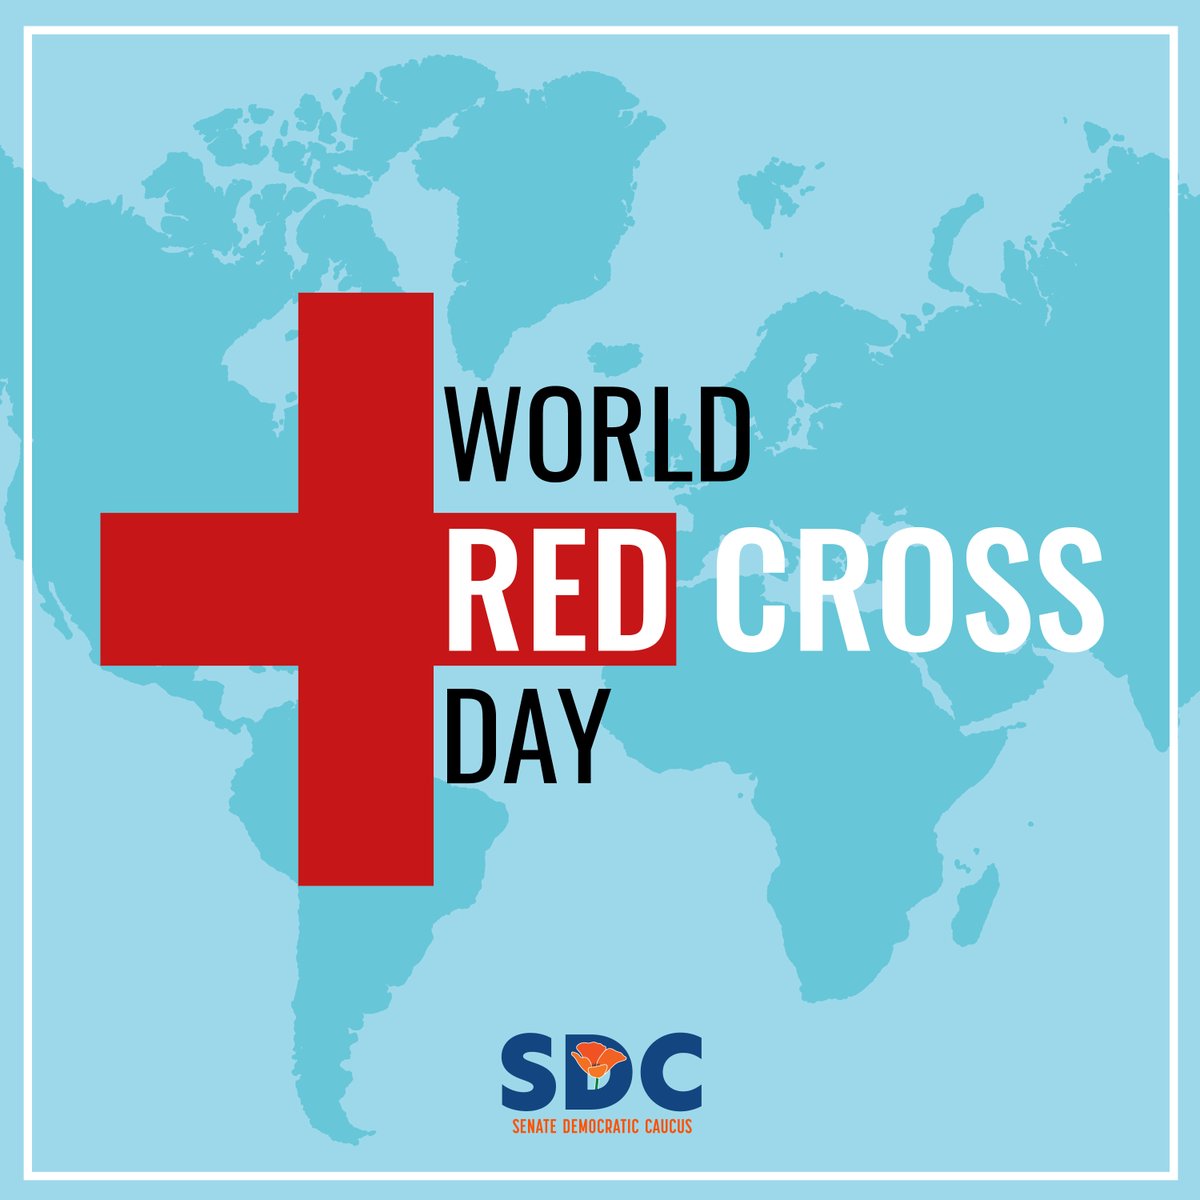 Today is World Red Cross Day. It is a day dedicated to celebrating the American Red Cross. Fun fact: one in 65 people in the world is helped by the Red Cross ❤️ #WorldRedCrossDay #RedCross